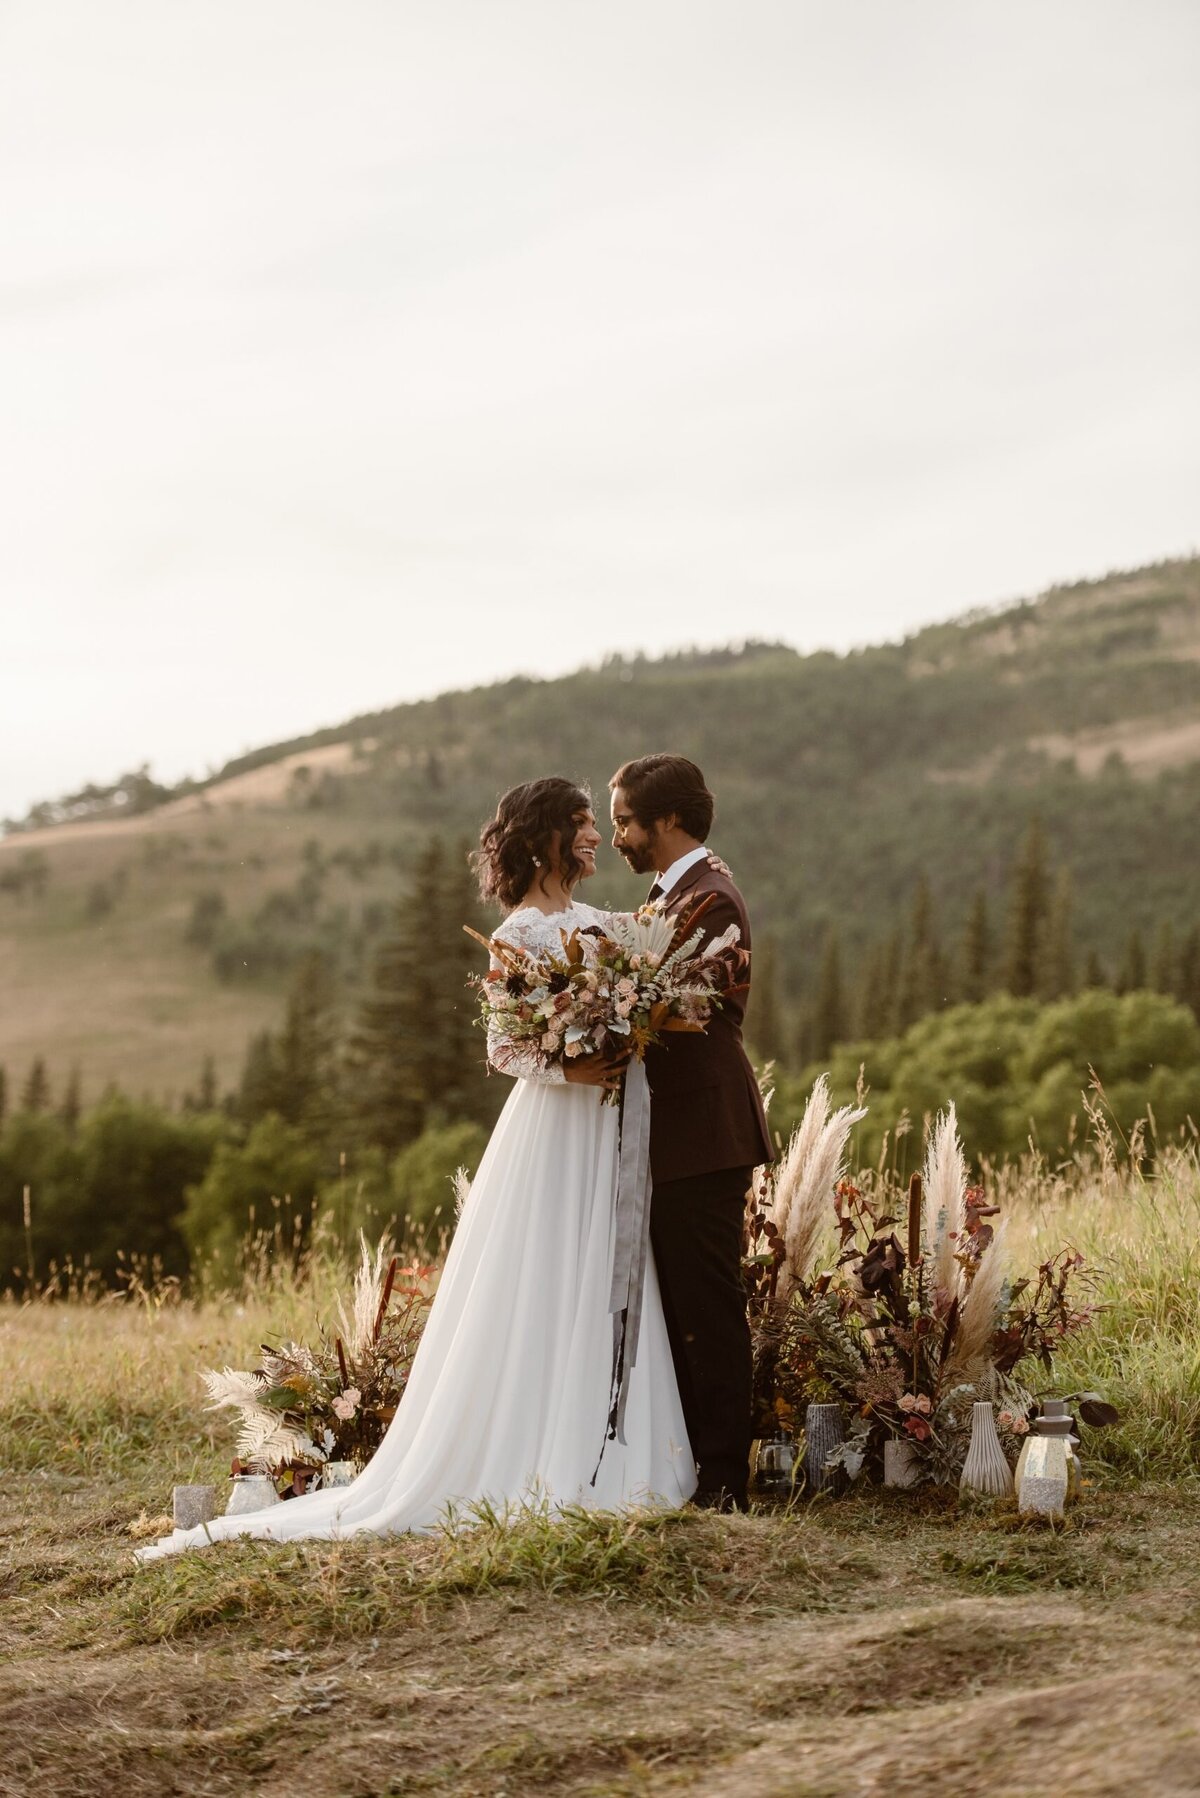 Bride wearing stunning two piece lace bridal gown from Cameo & Cufflinks, a contemporary bridal boutique based in Calgary, Alberta. Featured on the Brontë Bride Vendor Guide.